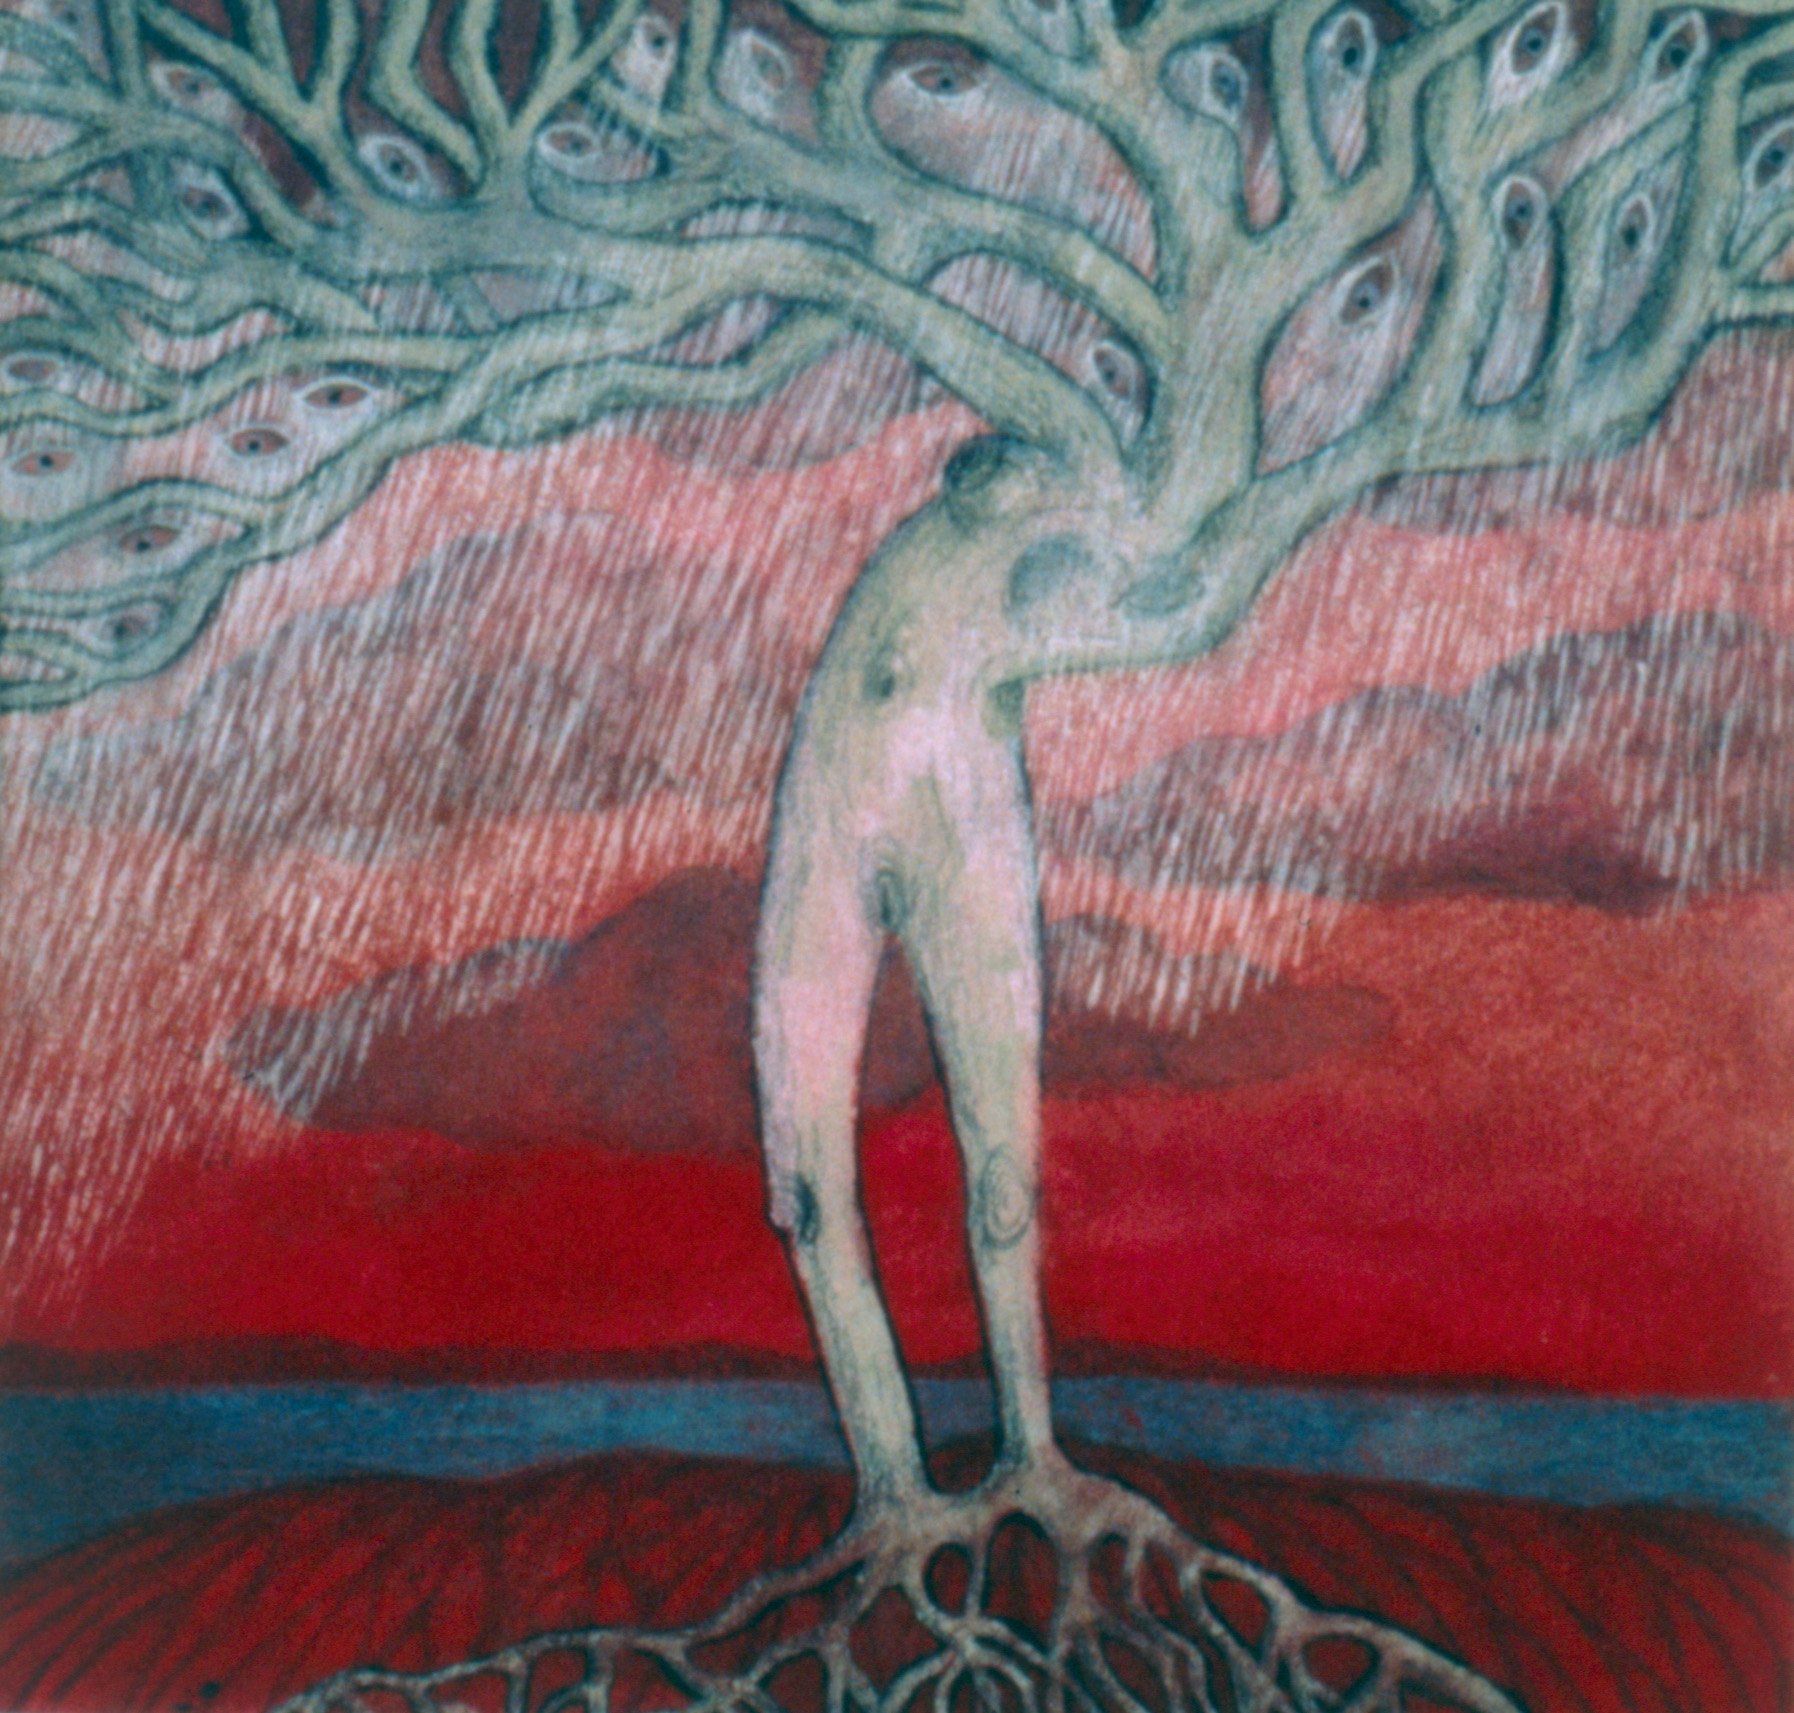 The crying tree, 2001